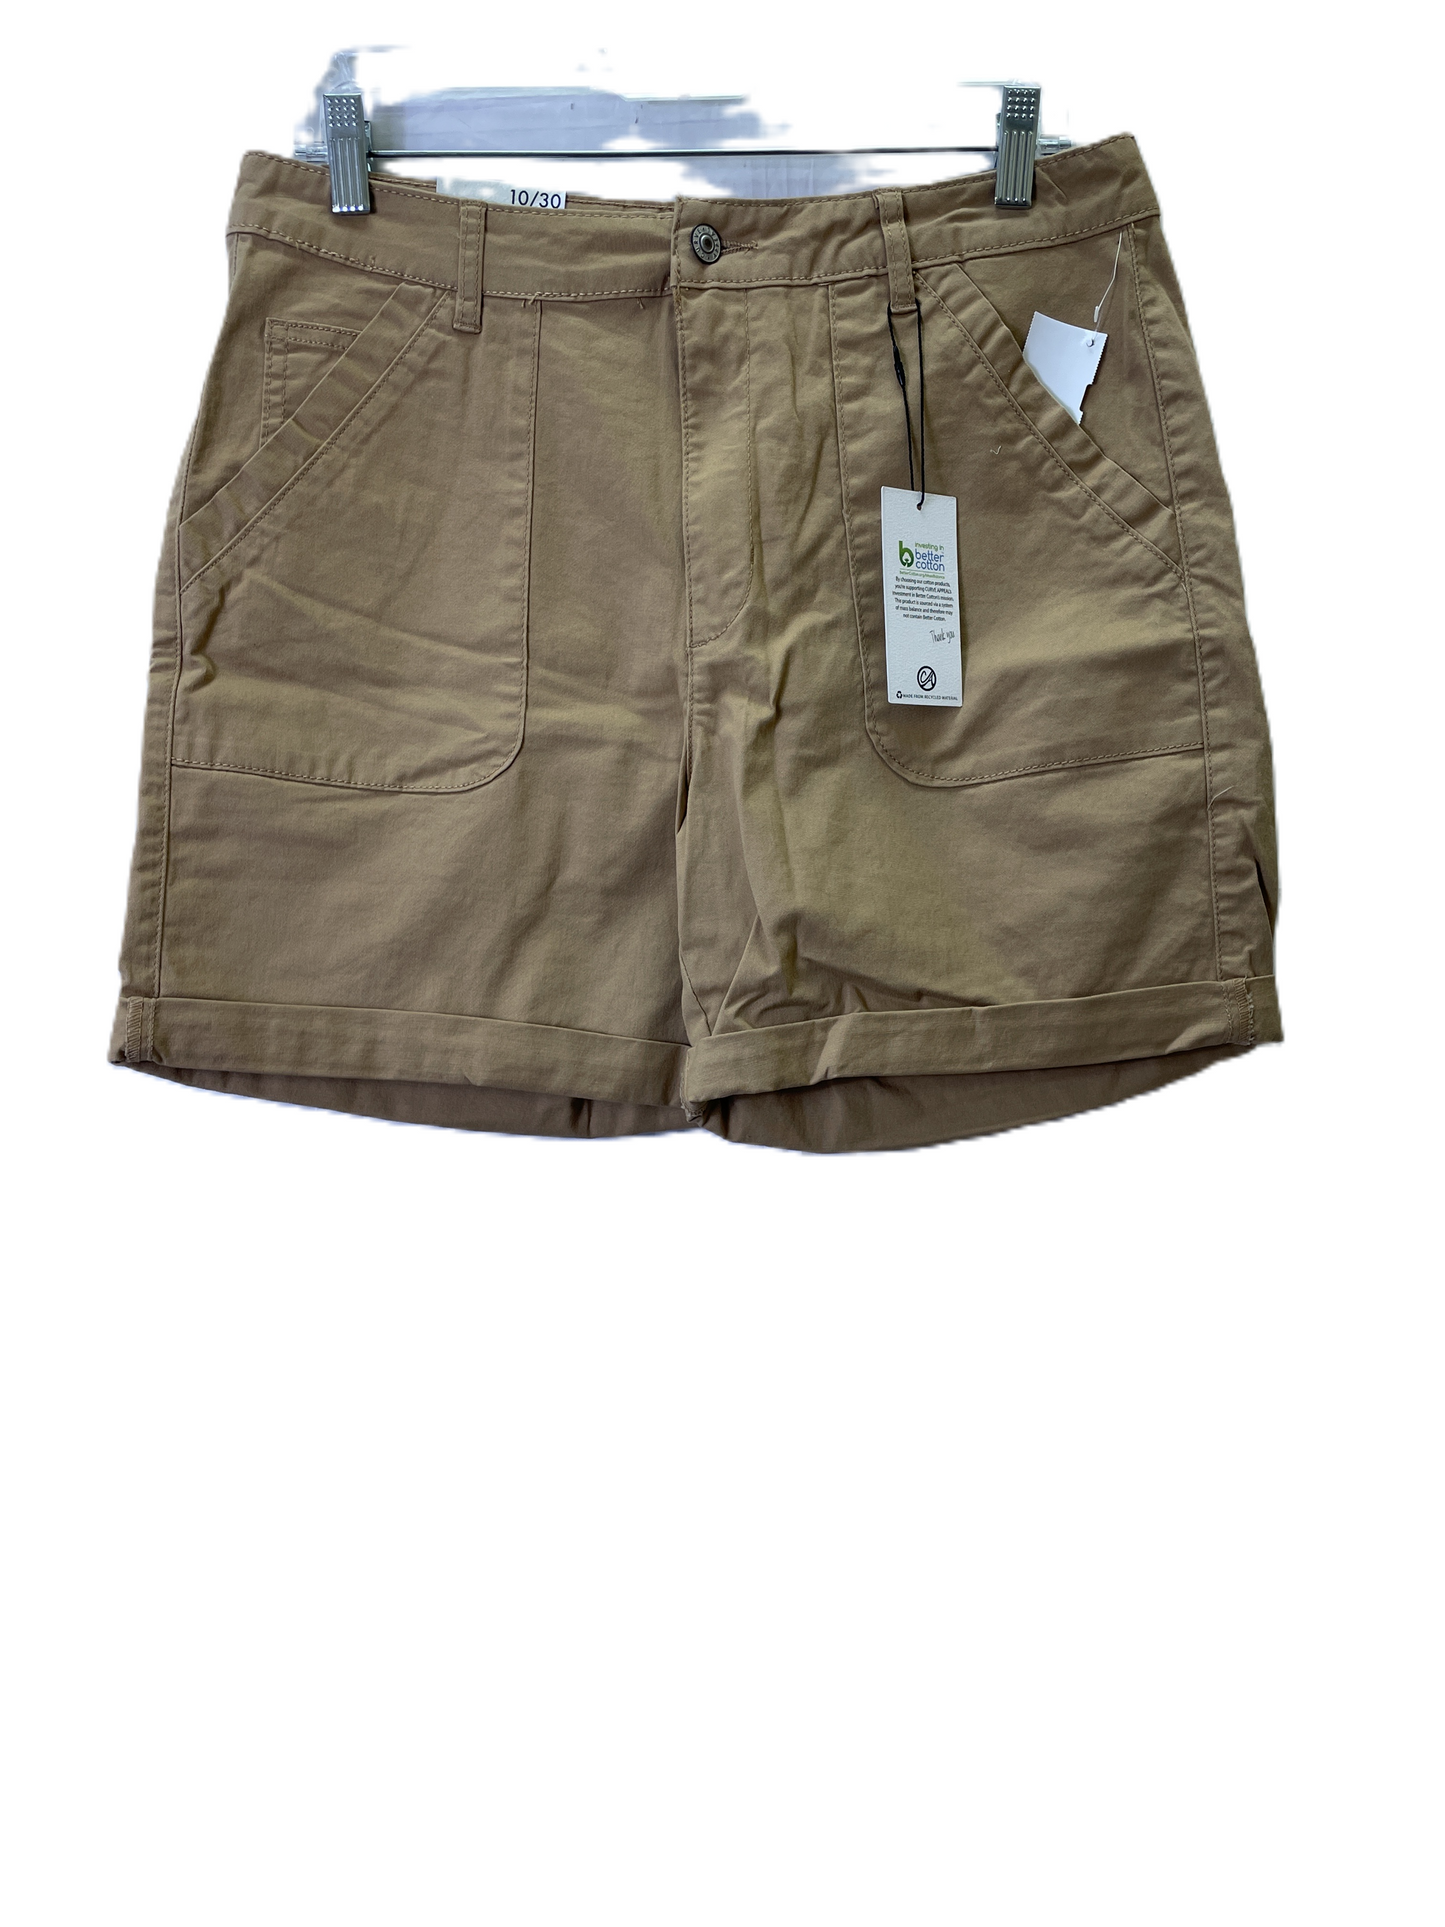 Tan Shorts By Curve Appeal, Size: 10